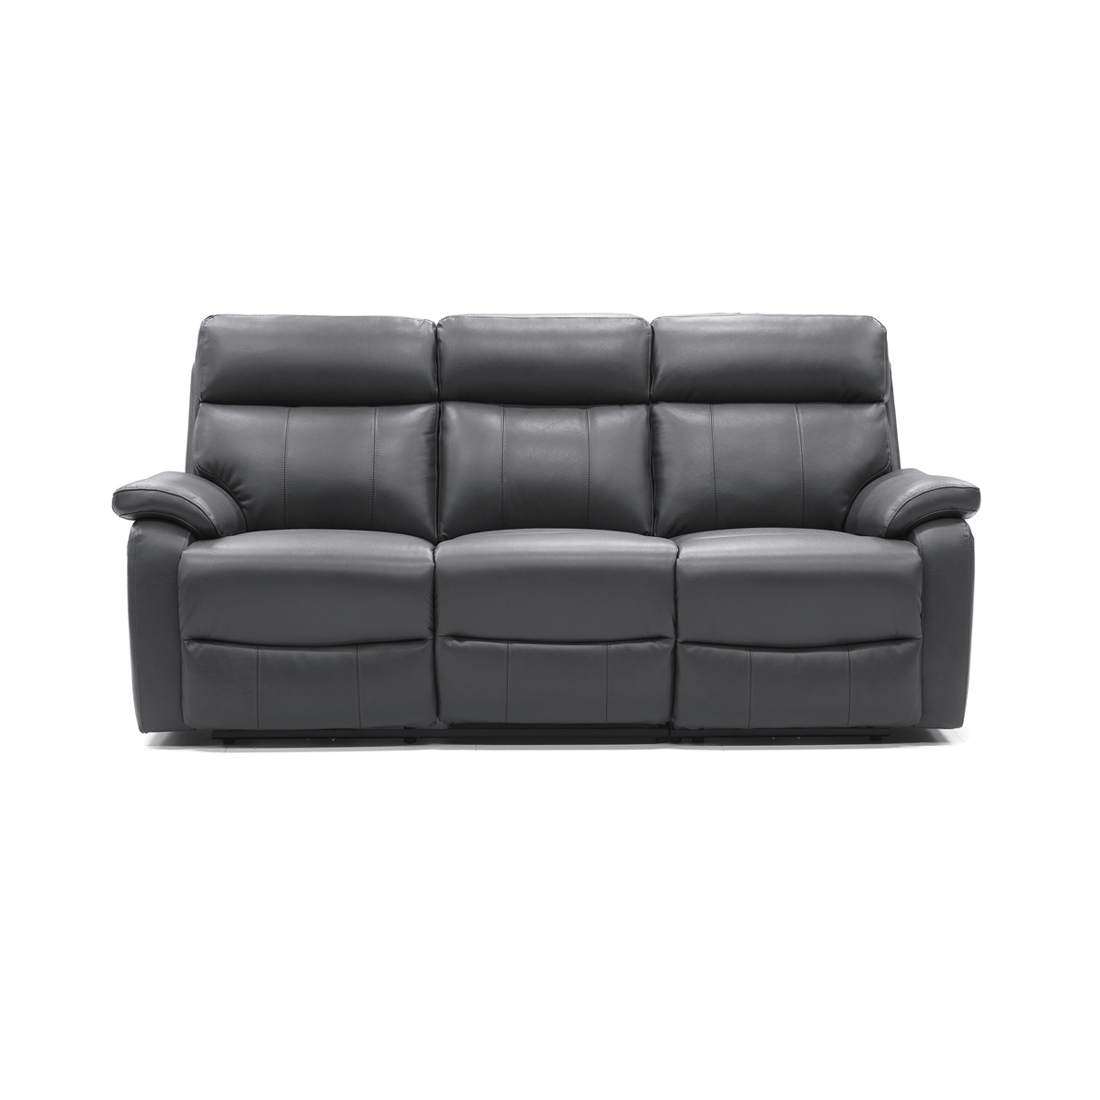 Senate Leather Electrical Recliner